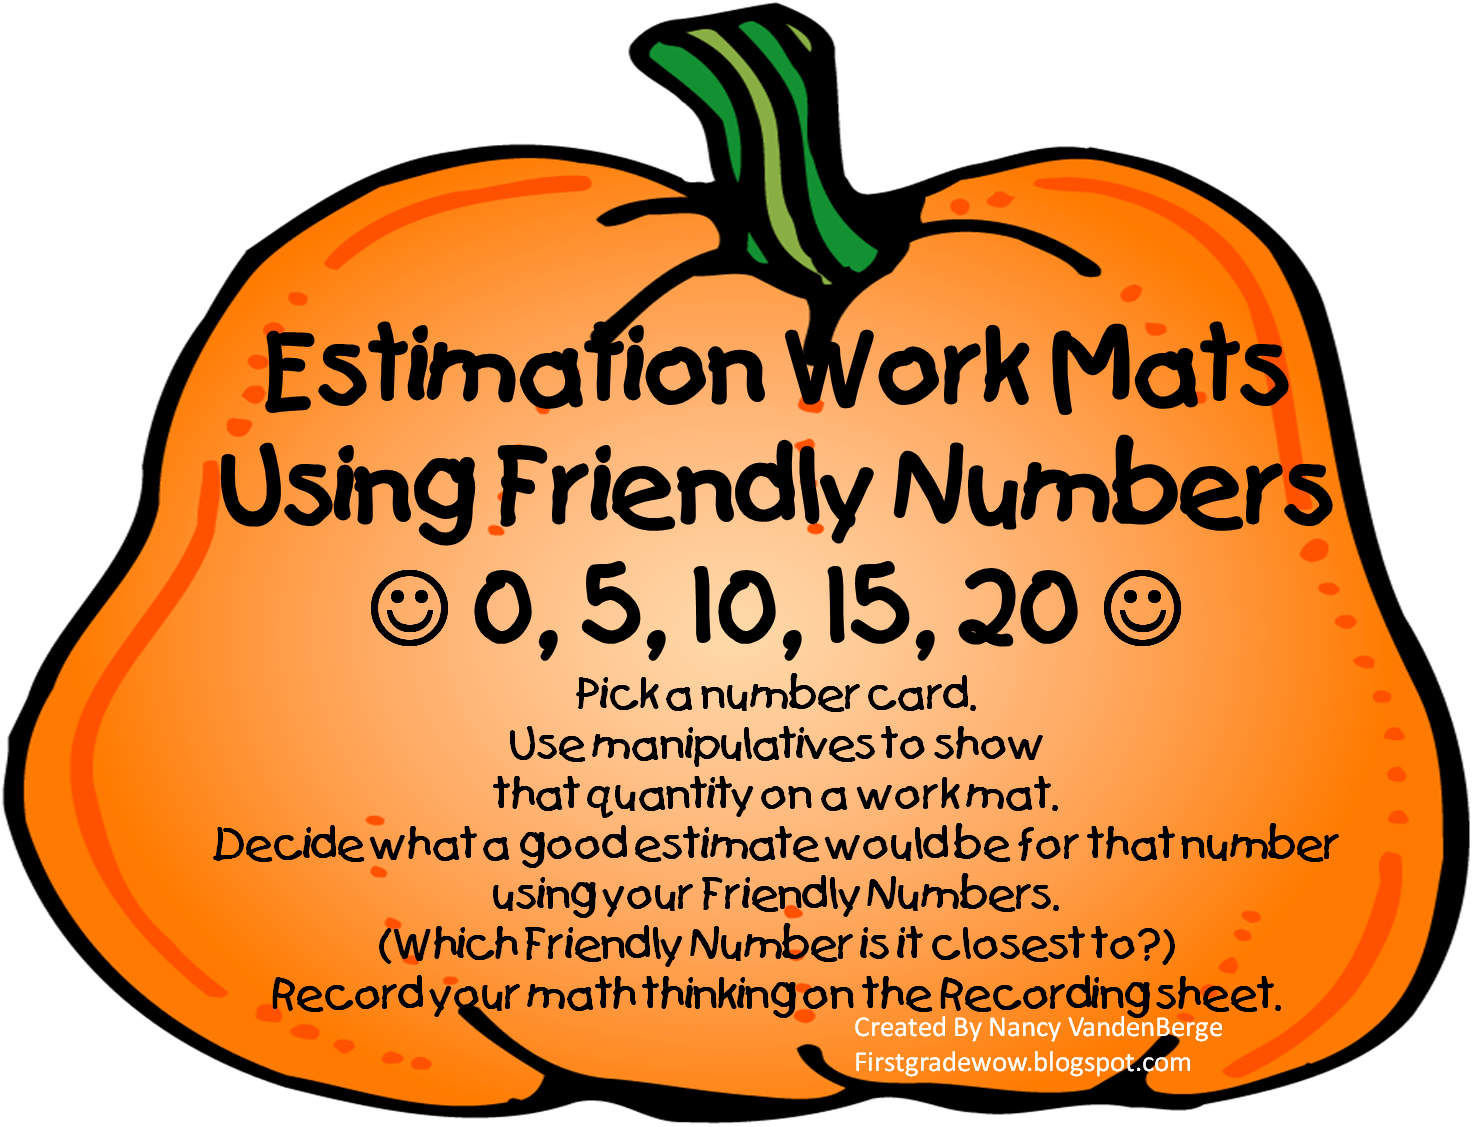 first-grade-wow-estimating-with-friendly-numbers